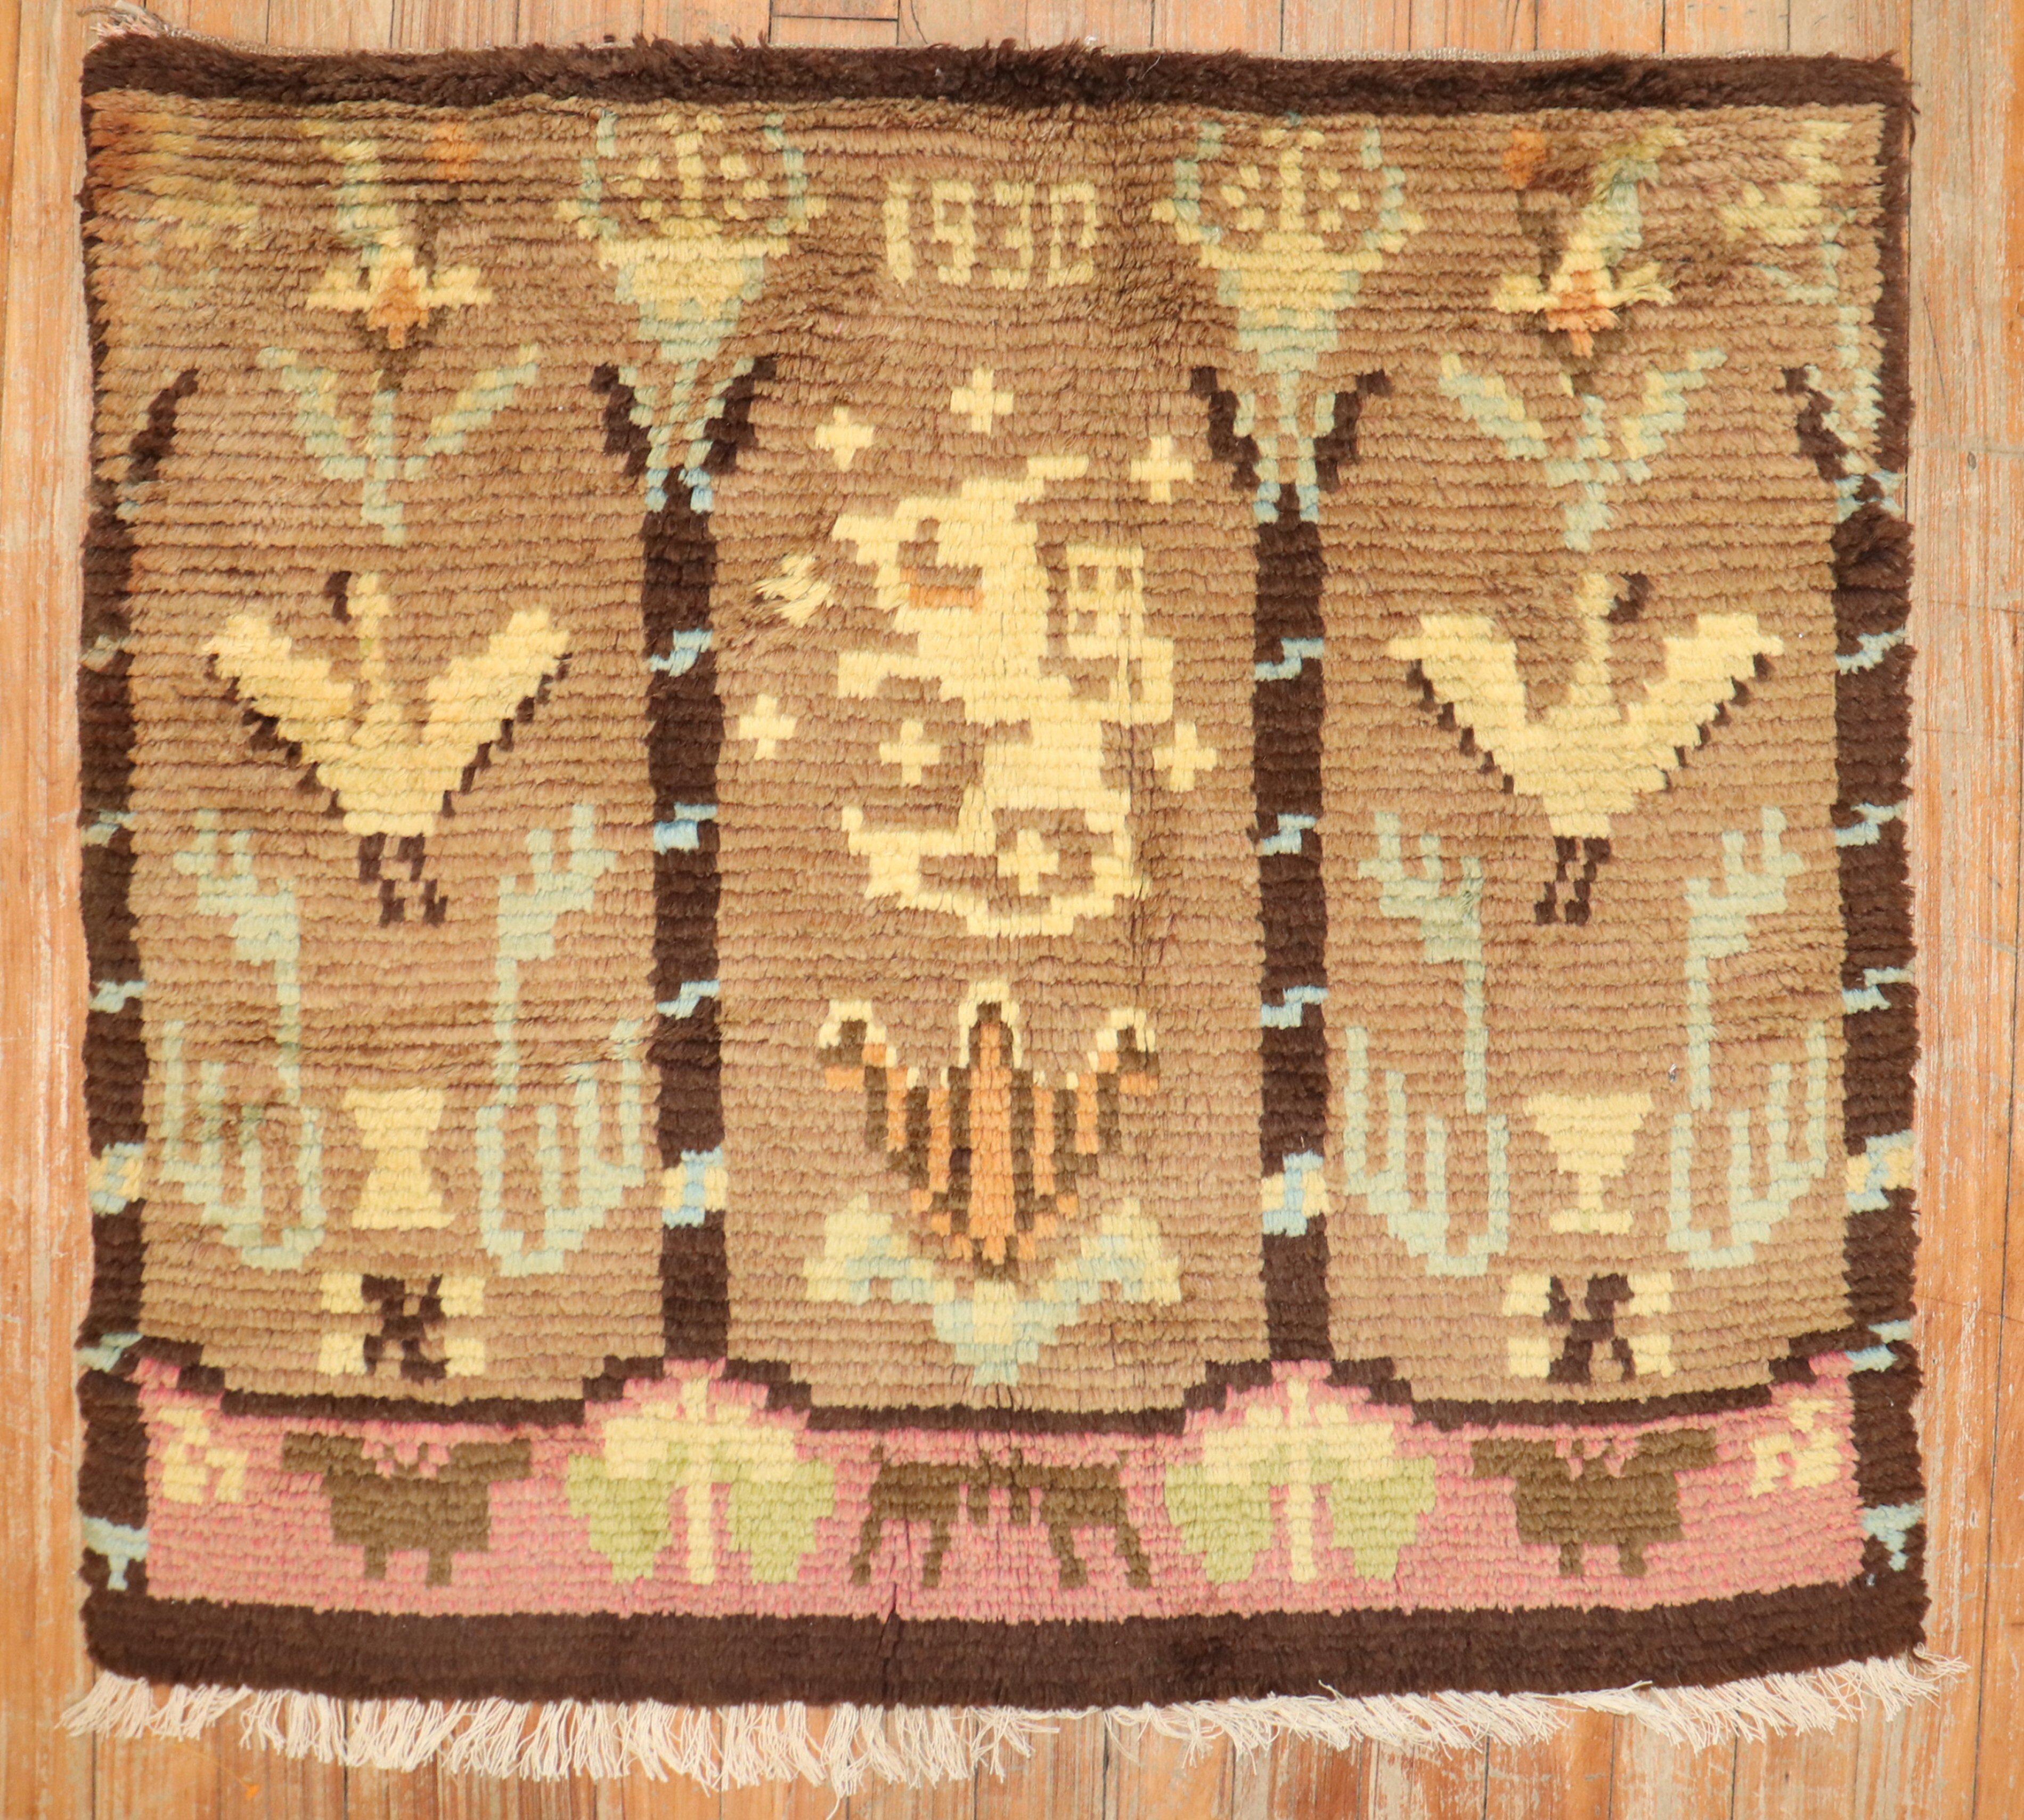 Small plush Swedish Rya rug from the 1930s

Measures: 2'4” x 2'9”

Swedish Rya rugs are extremely colorful, lovely and quite chic and each have their own character to them. They tend to have thicker shaggy piles which were meticulously hand